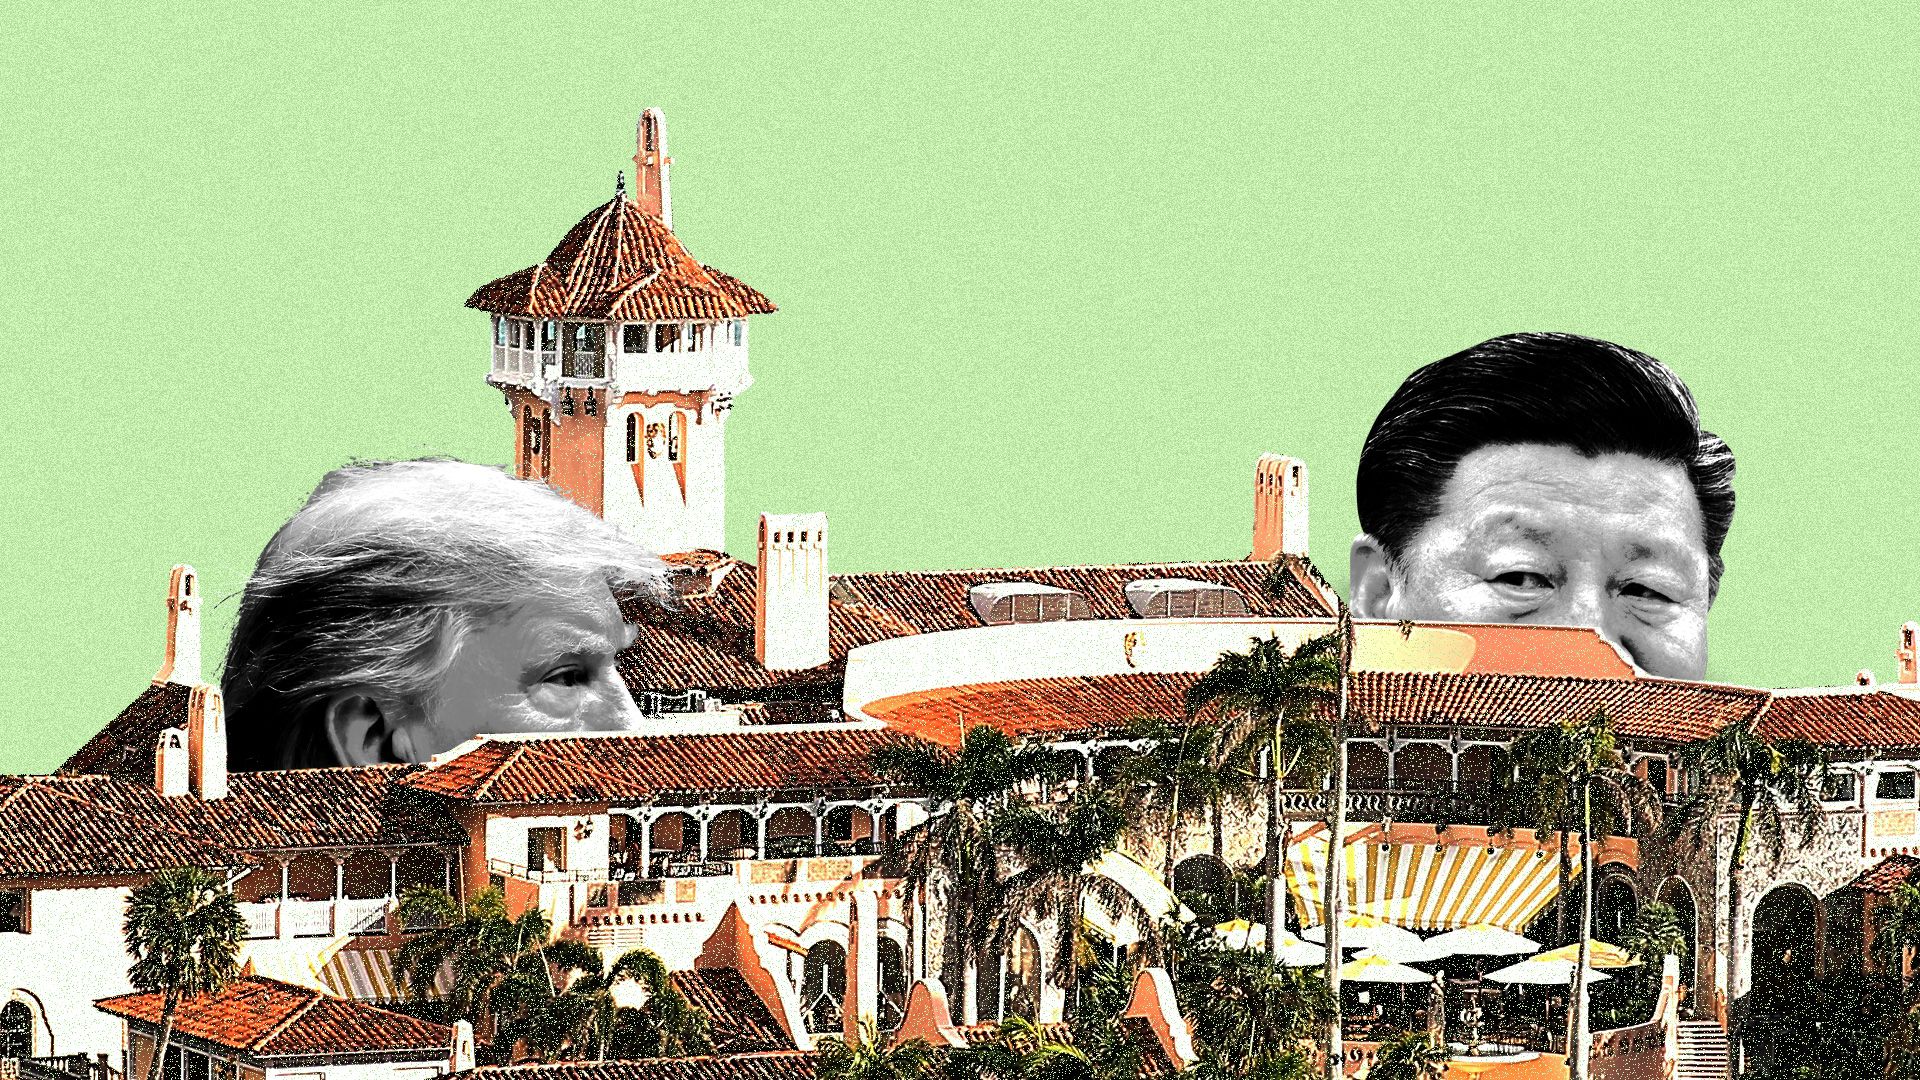 Donald Trump and Xi Jinping peering at each other on the grounds of Mar-a-Lago